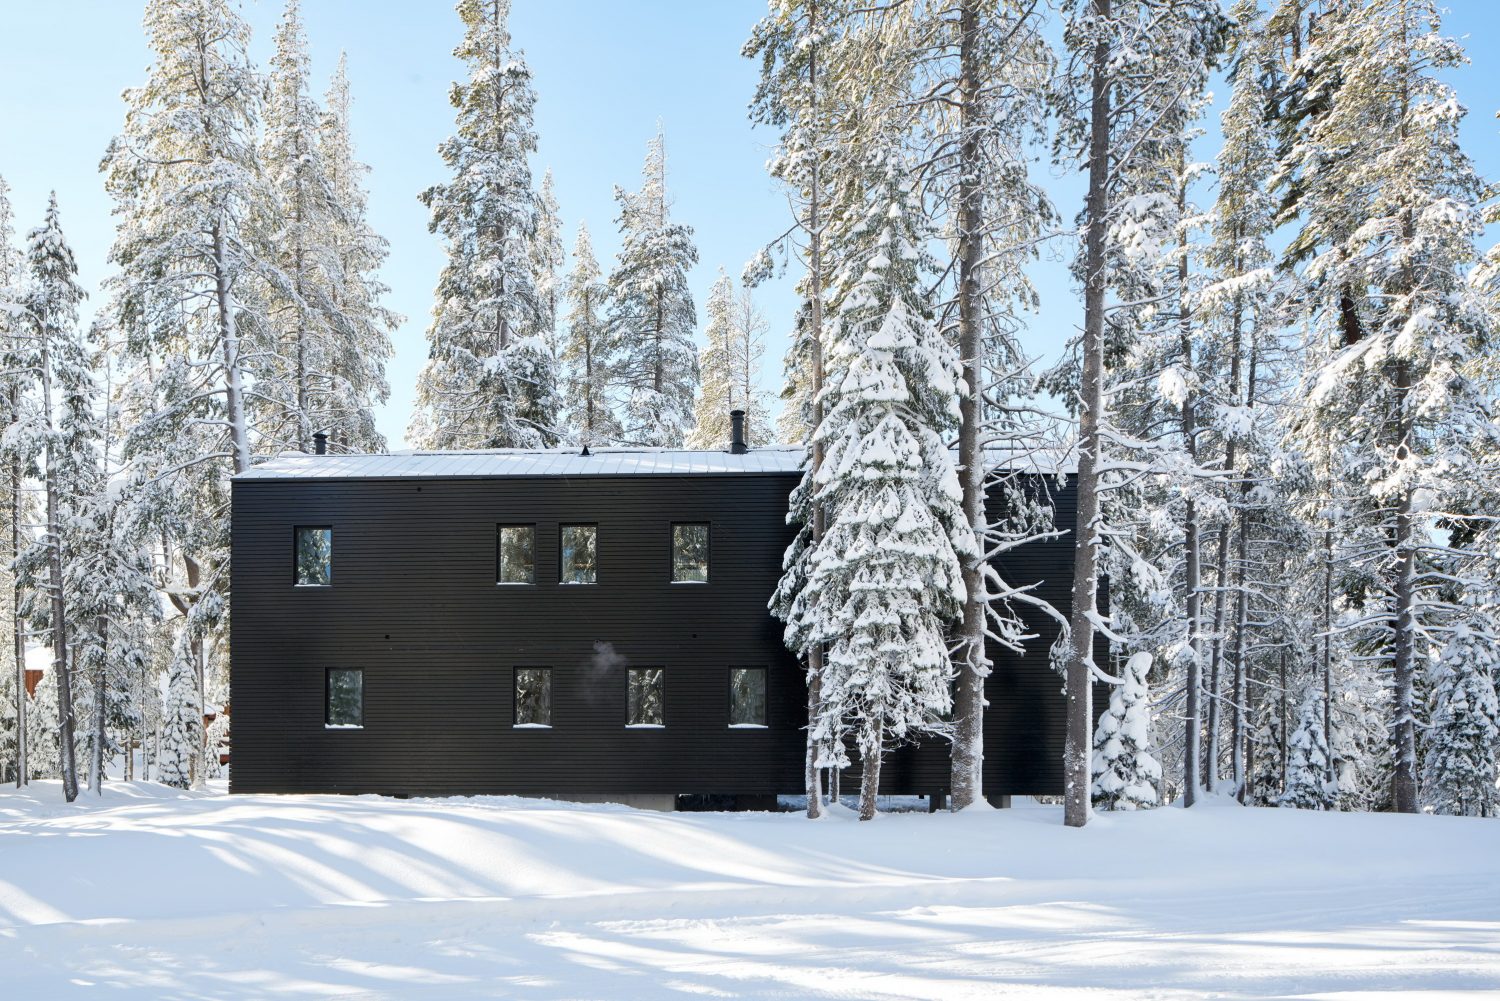 Troll Hus by Mork-Ulnes Architects